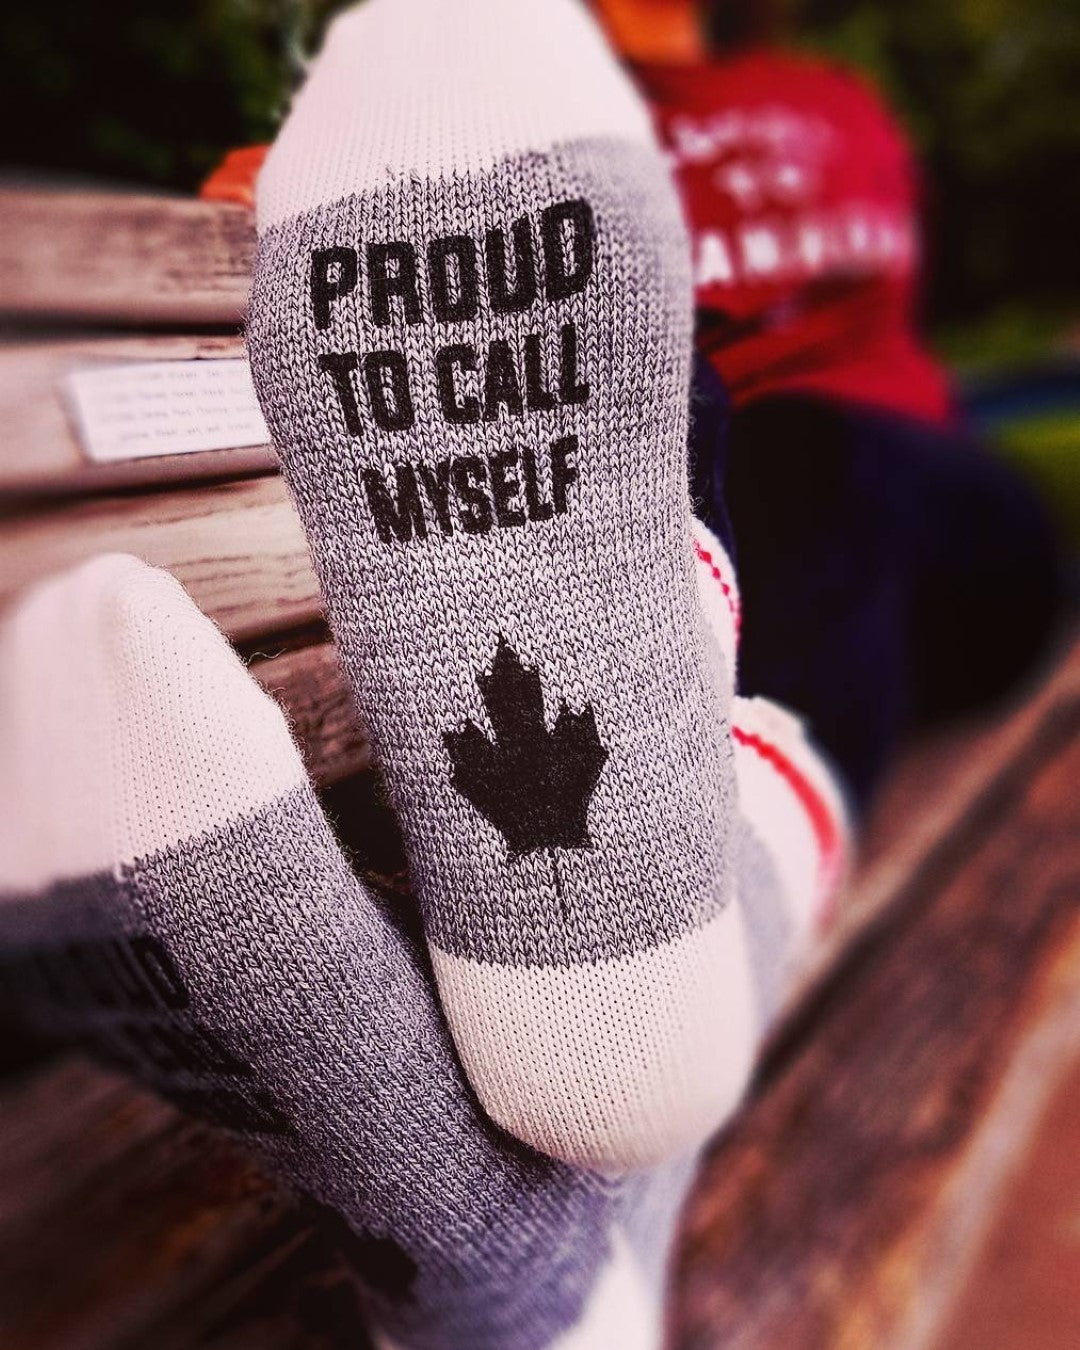 Canuck Sock - CLEARANCE (50% OFF)